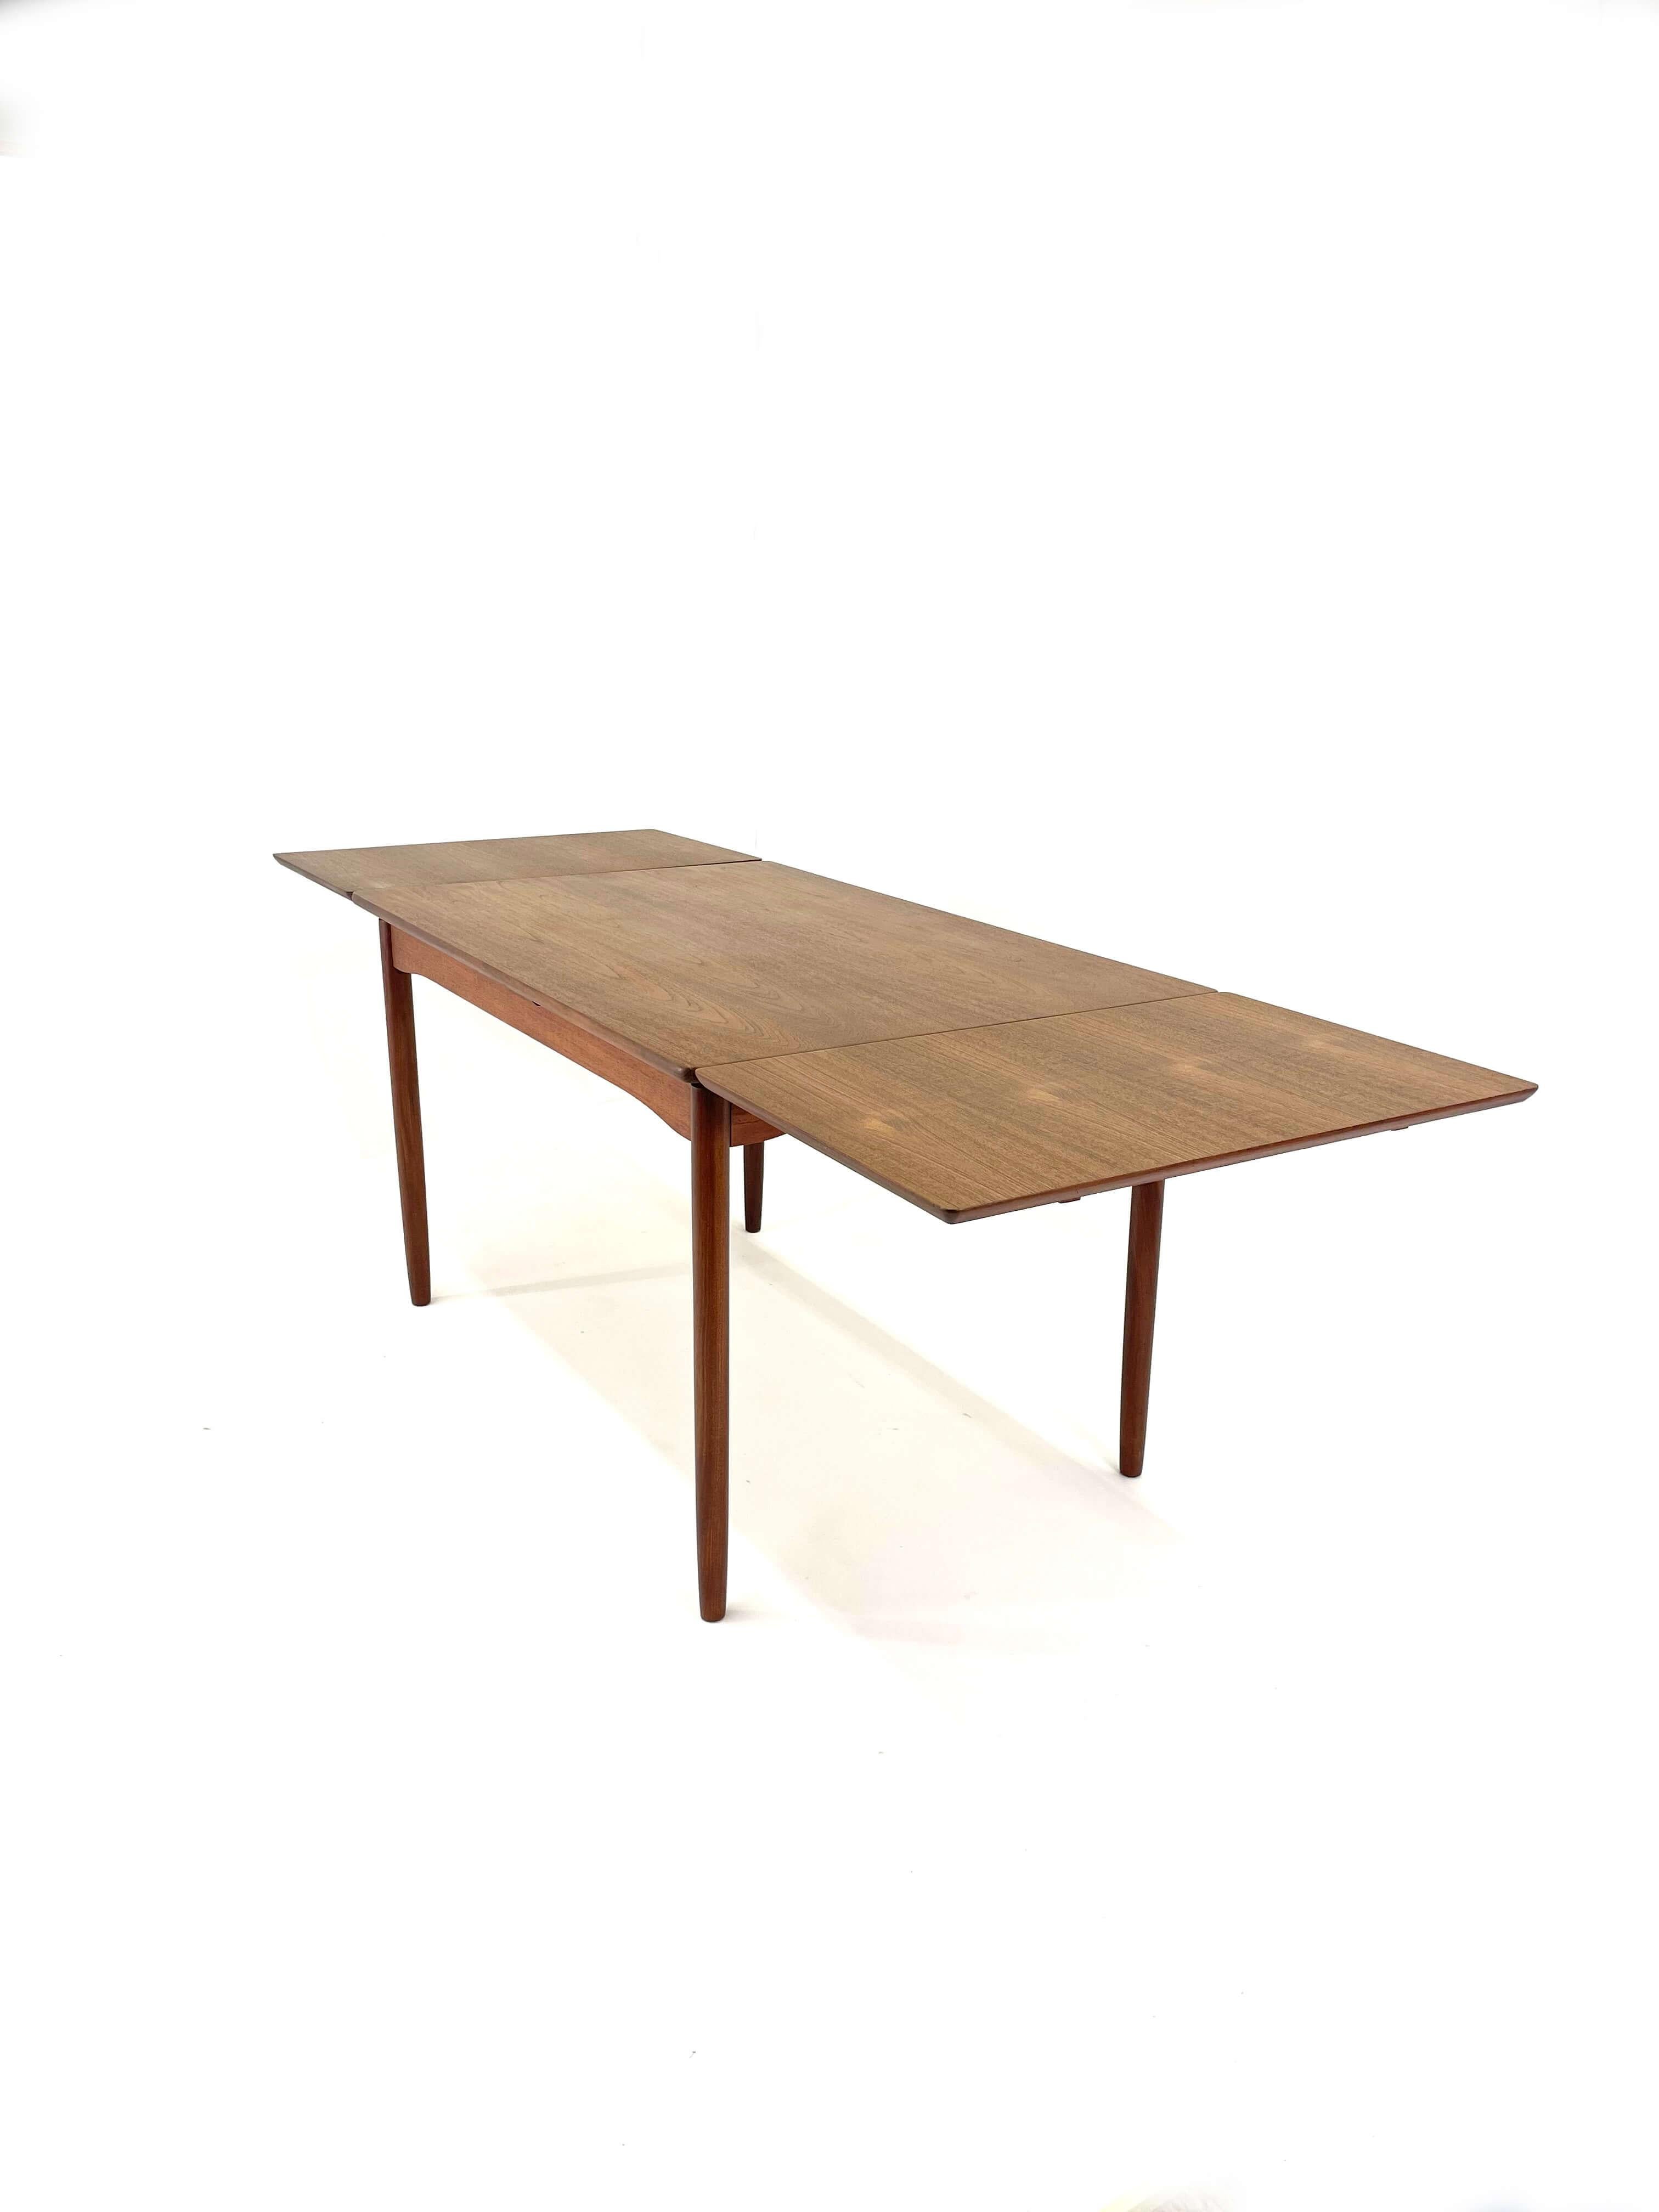 This is a lovely and classic Danish Modern Drawer Leaf Table in Teak and Afromosia. We have restored this to great vintage condition. This is a wonderful kitchen table. it is made for a small family. It is unfussy and simple but great quality. This